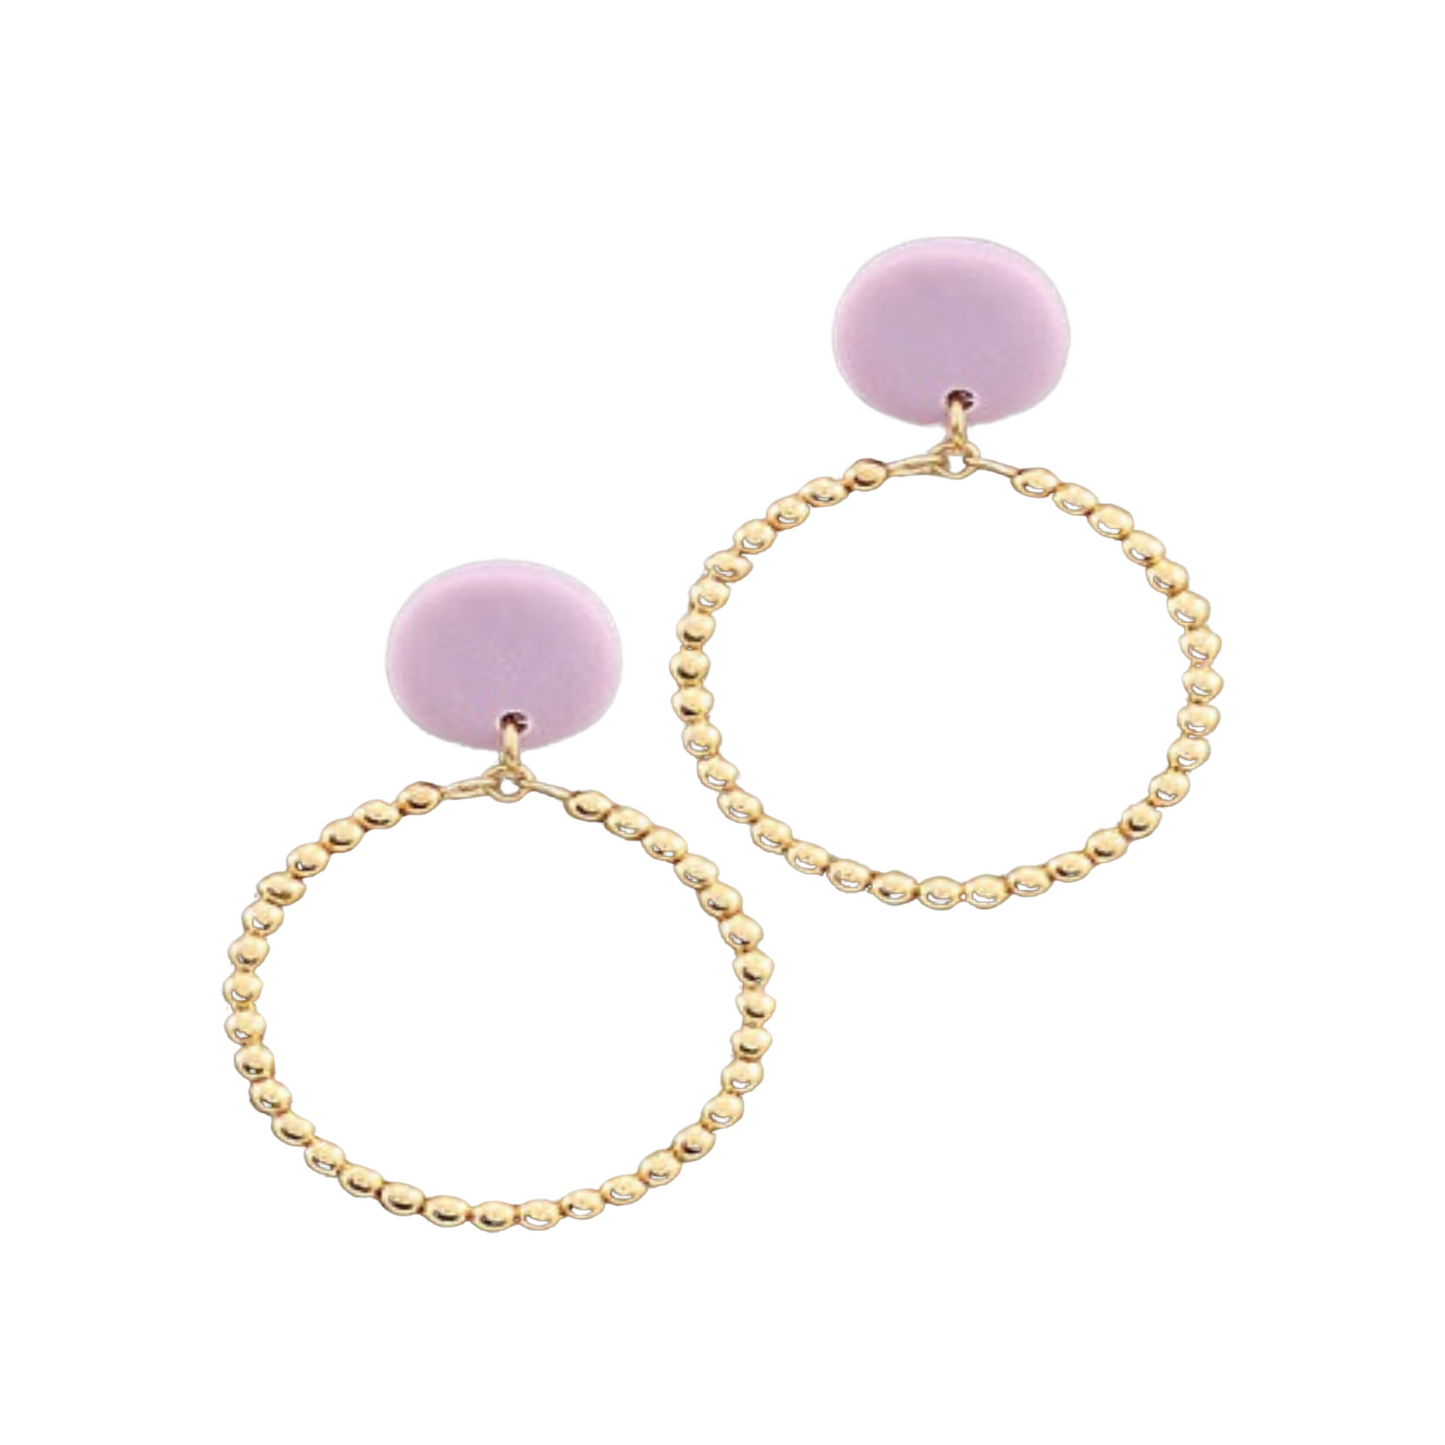 Make a bold statement with our Disk Hoop Earrings. Featuring a gold-colored hoop with three different colors — lavender, black, and white — these earrings will add the perfect pop of color to any outfit. The large, lightweight hoops provide an unforgettable look that’s sure to turn heads.